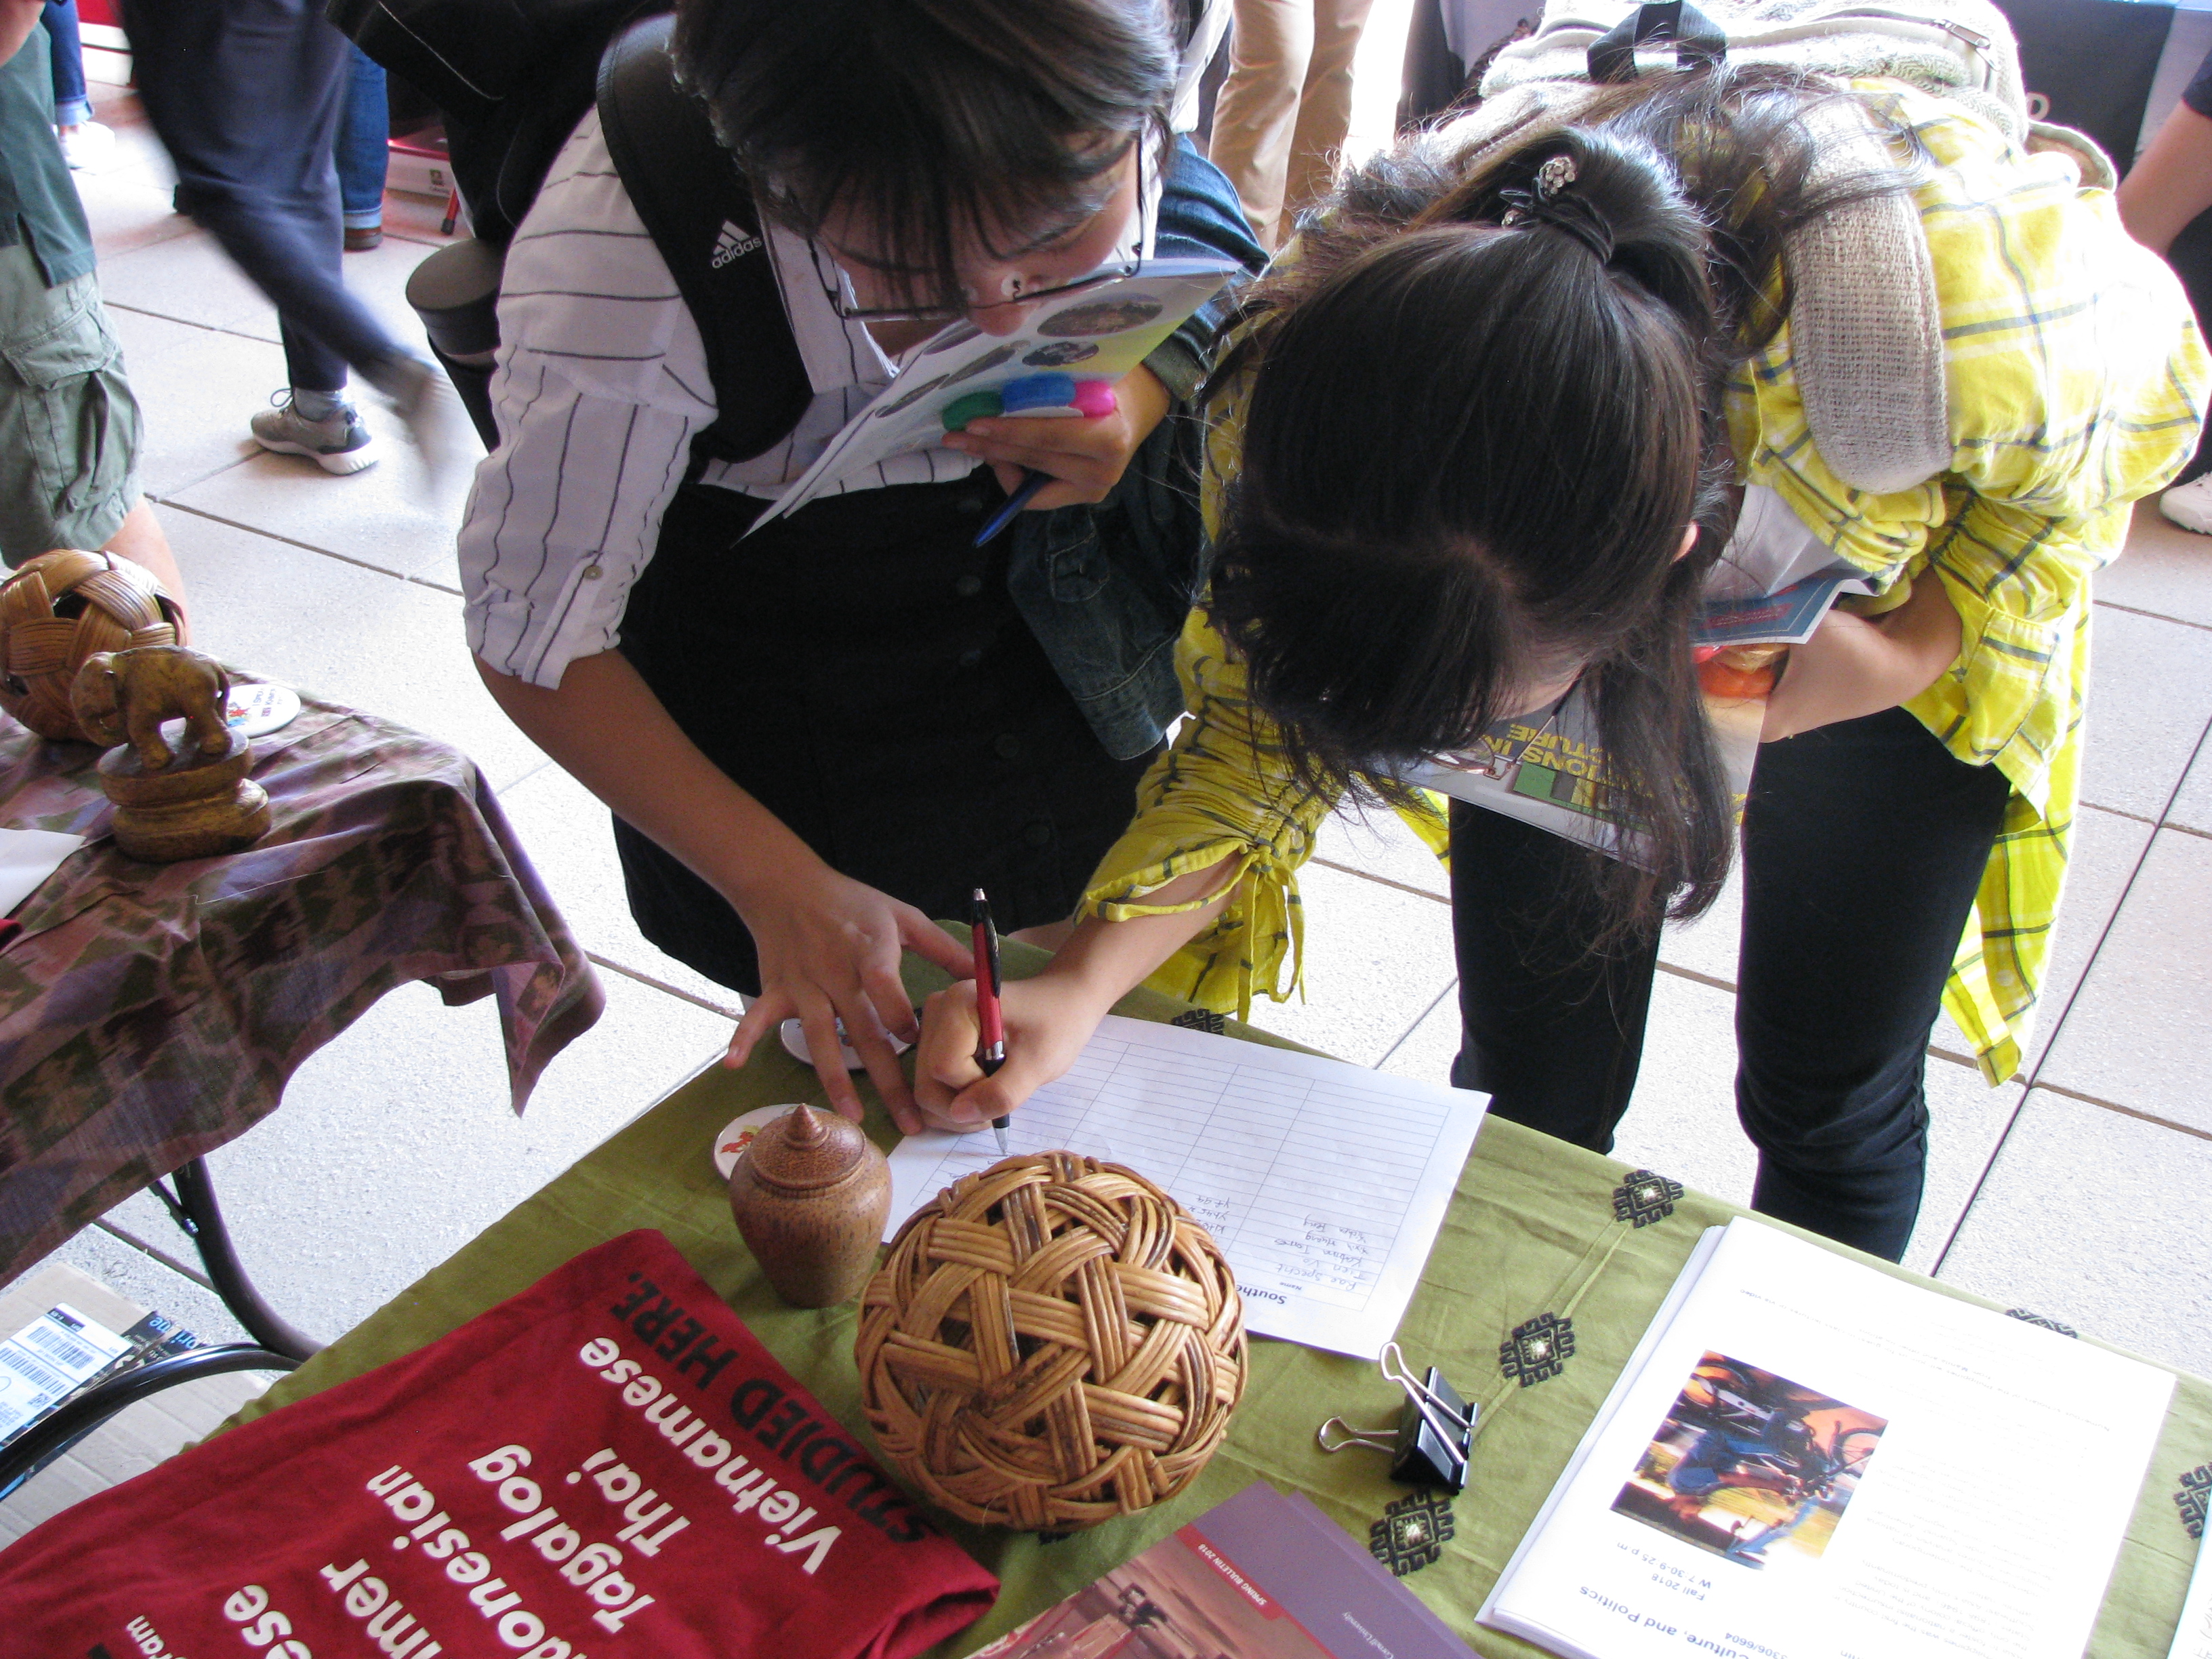 Two students signing up for more information at a table advertising the six Southeast Asian languages taught at Cornell.